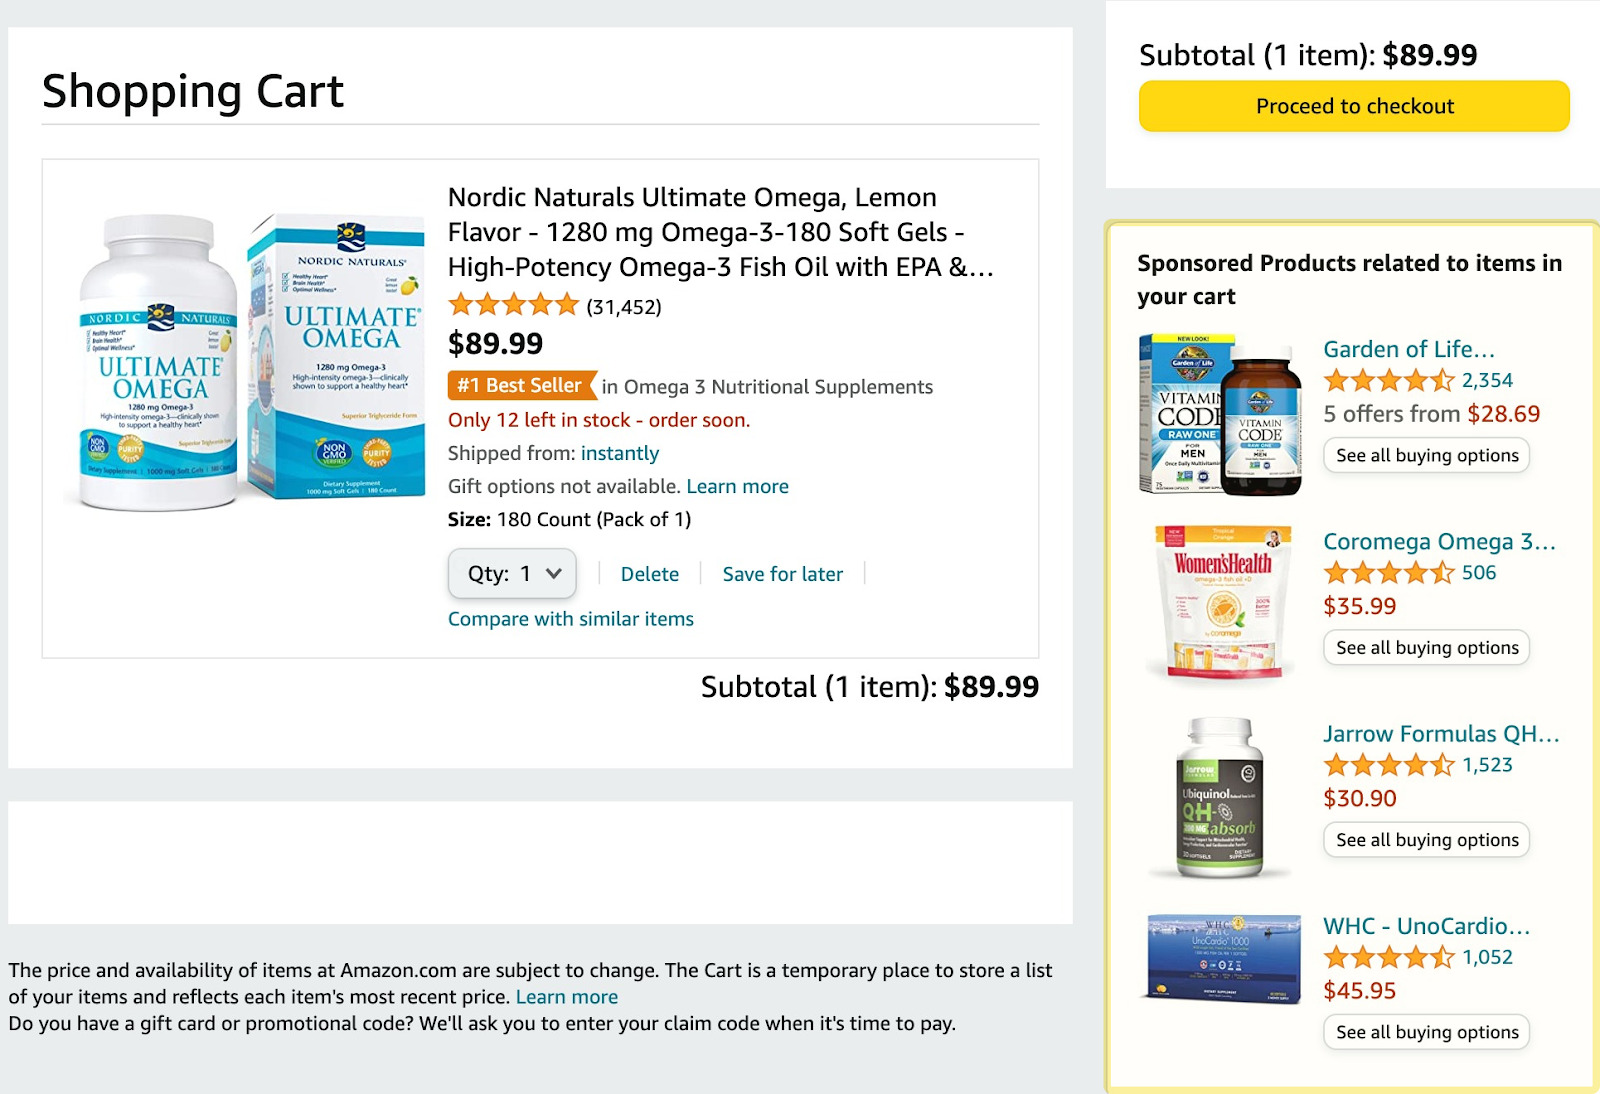 Cart page showing item added to cart. To the right, a list of sponsored products